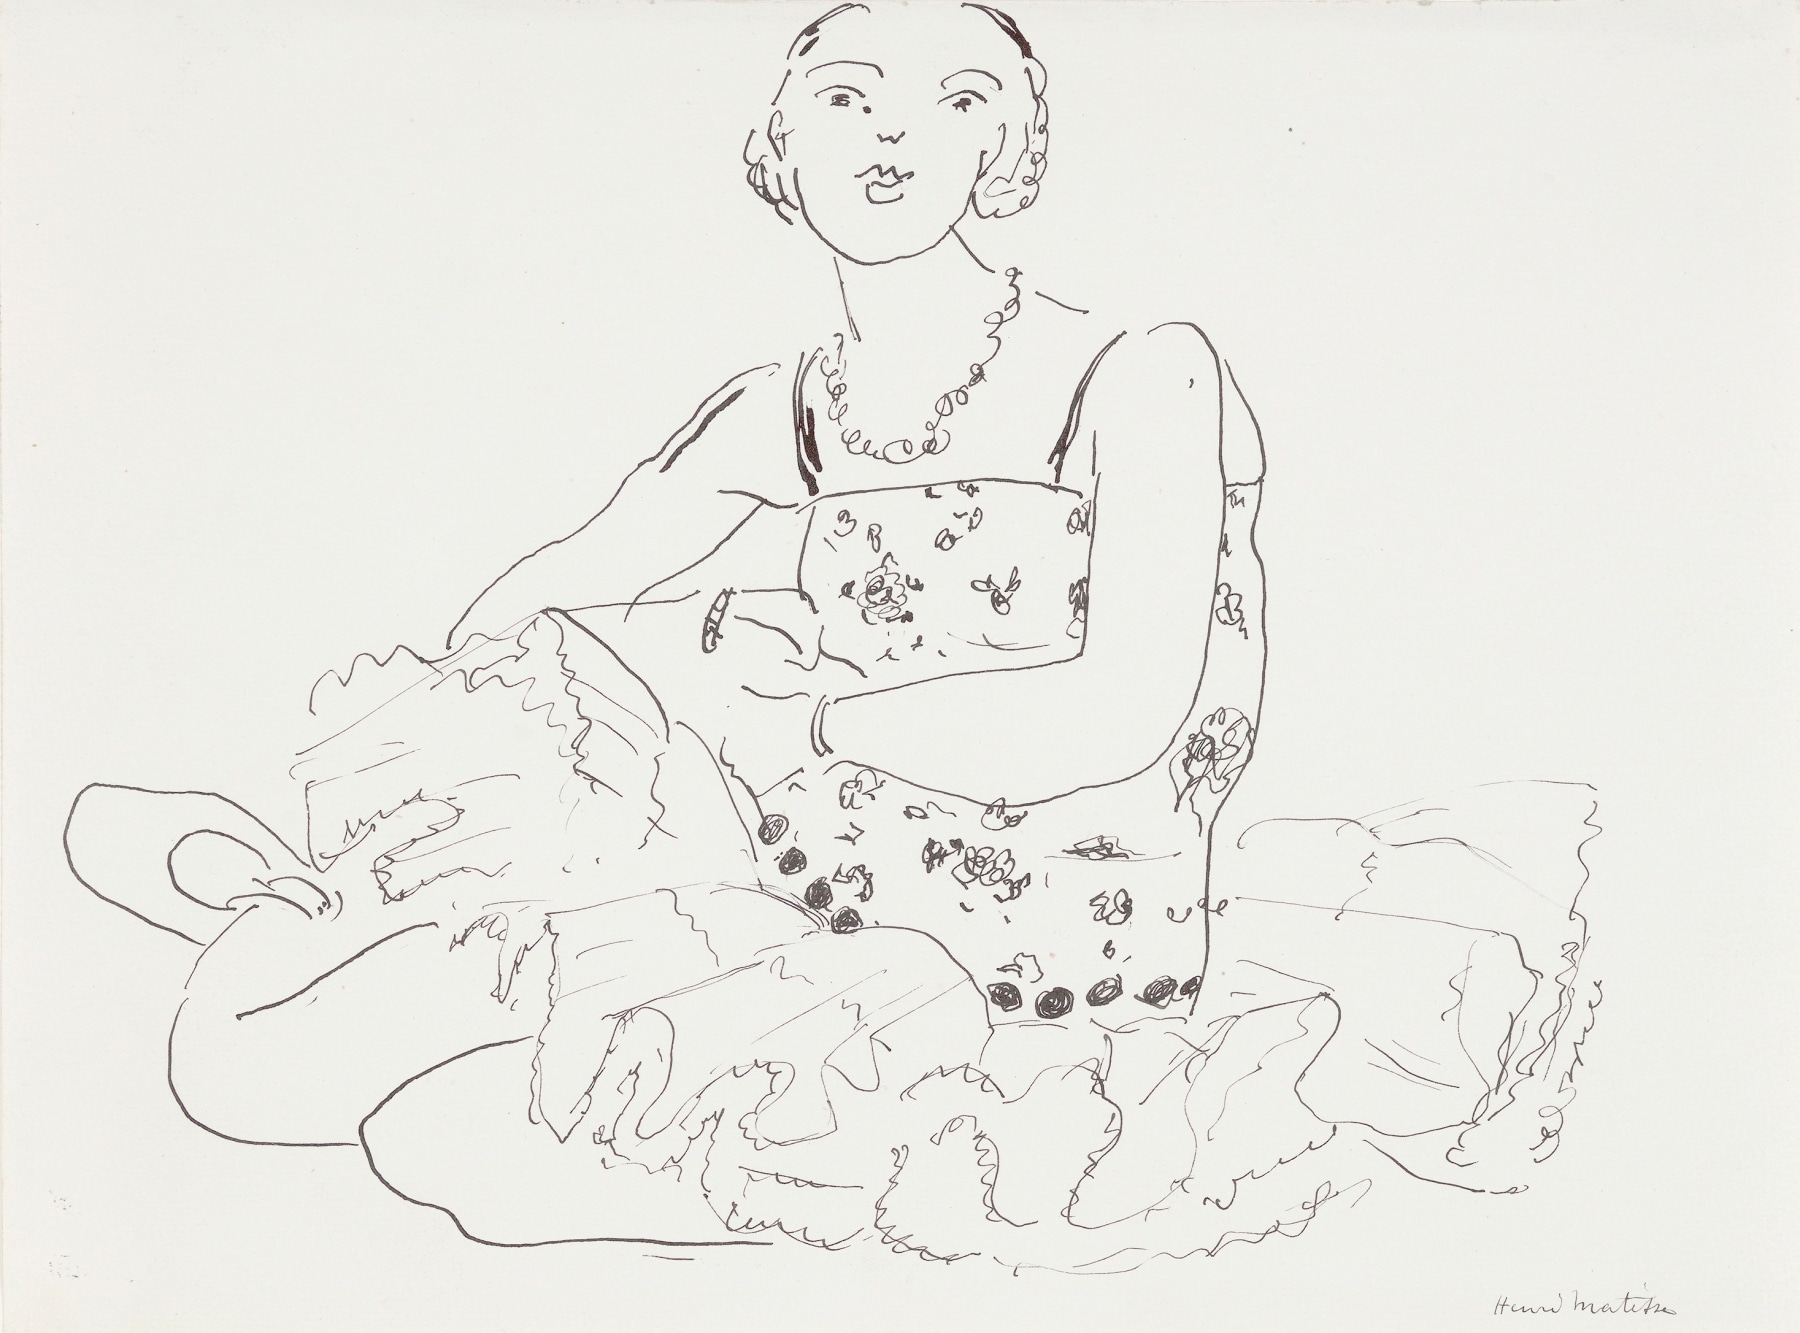 Henri Matisse  Seated Ballerina, c. 1925  Pen and ink on paper 8 1/8 x 11 1/8 inches